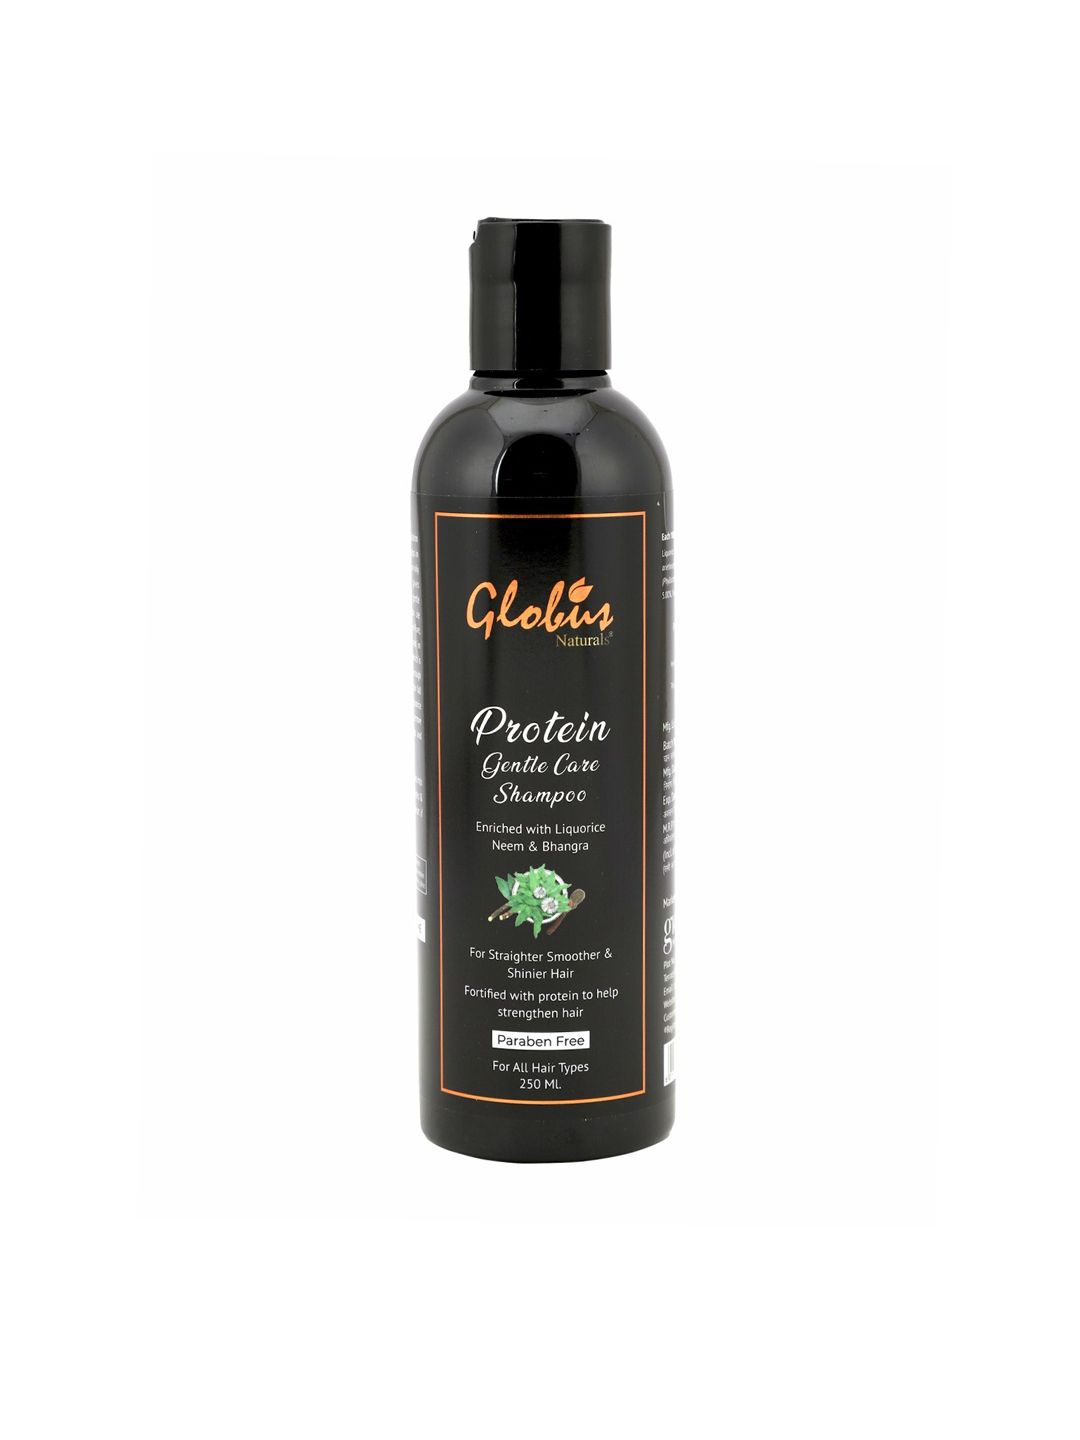 Globus Naturals Protein Gentle Care Hair Growth Shampoo 250 ml Price in India